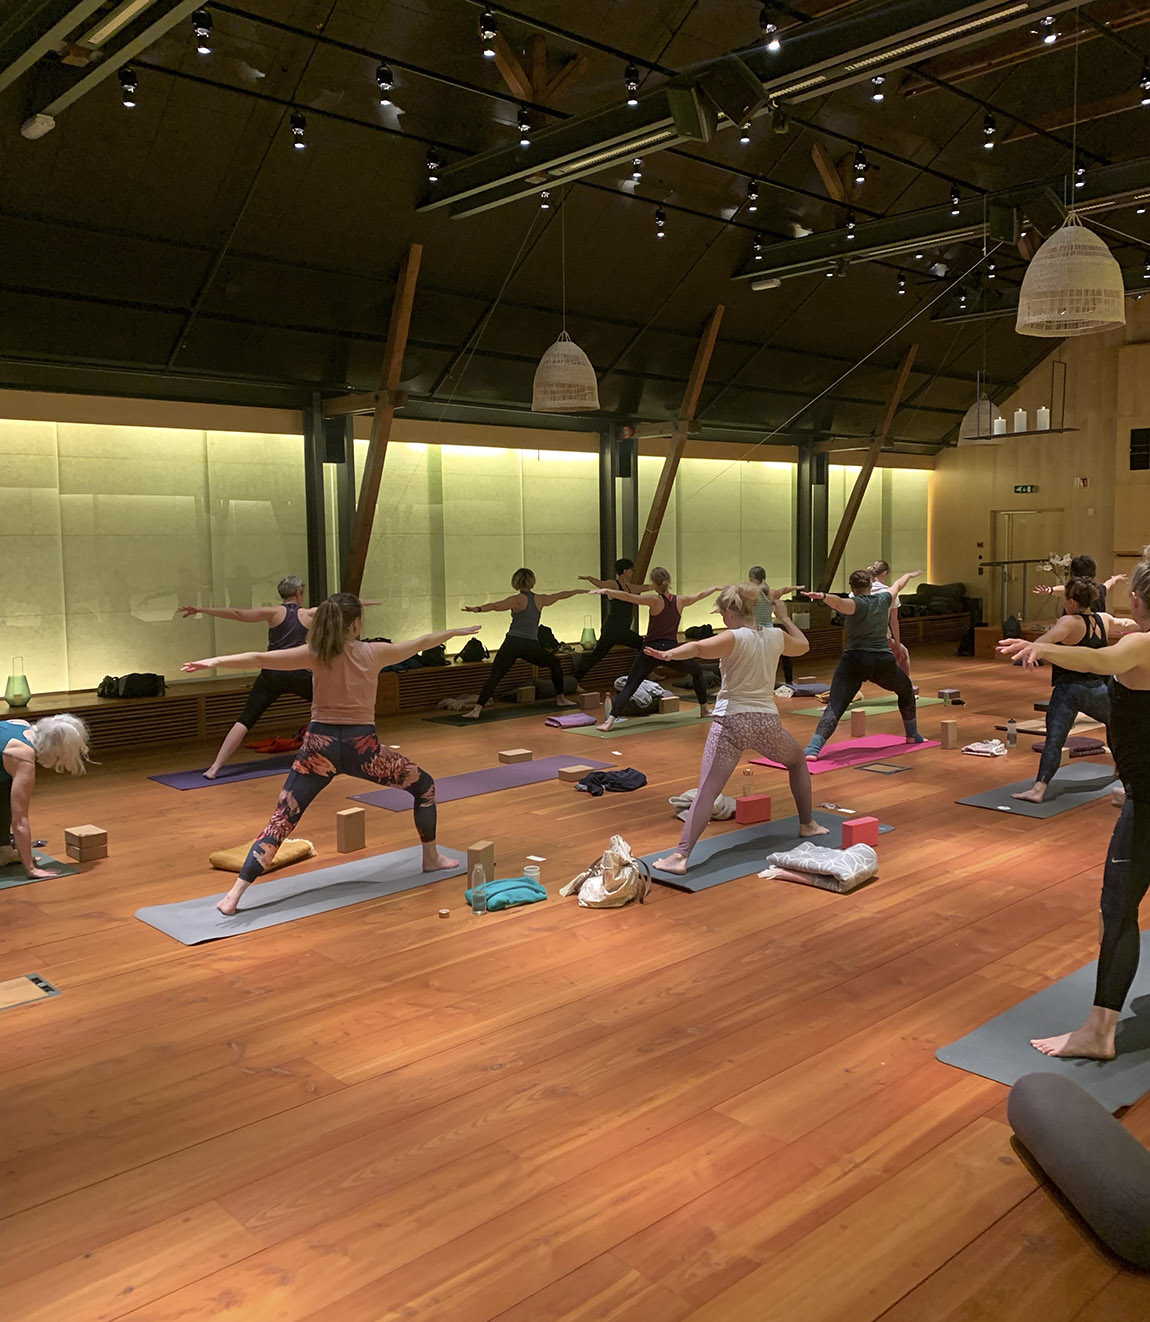 Fornebu Yoga: Meaningful presence and movement for all